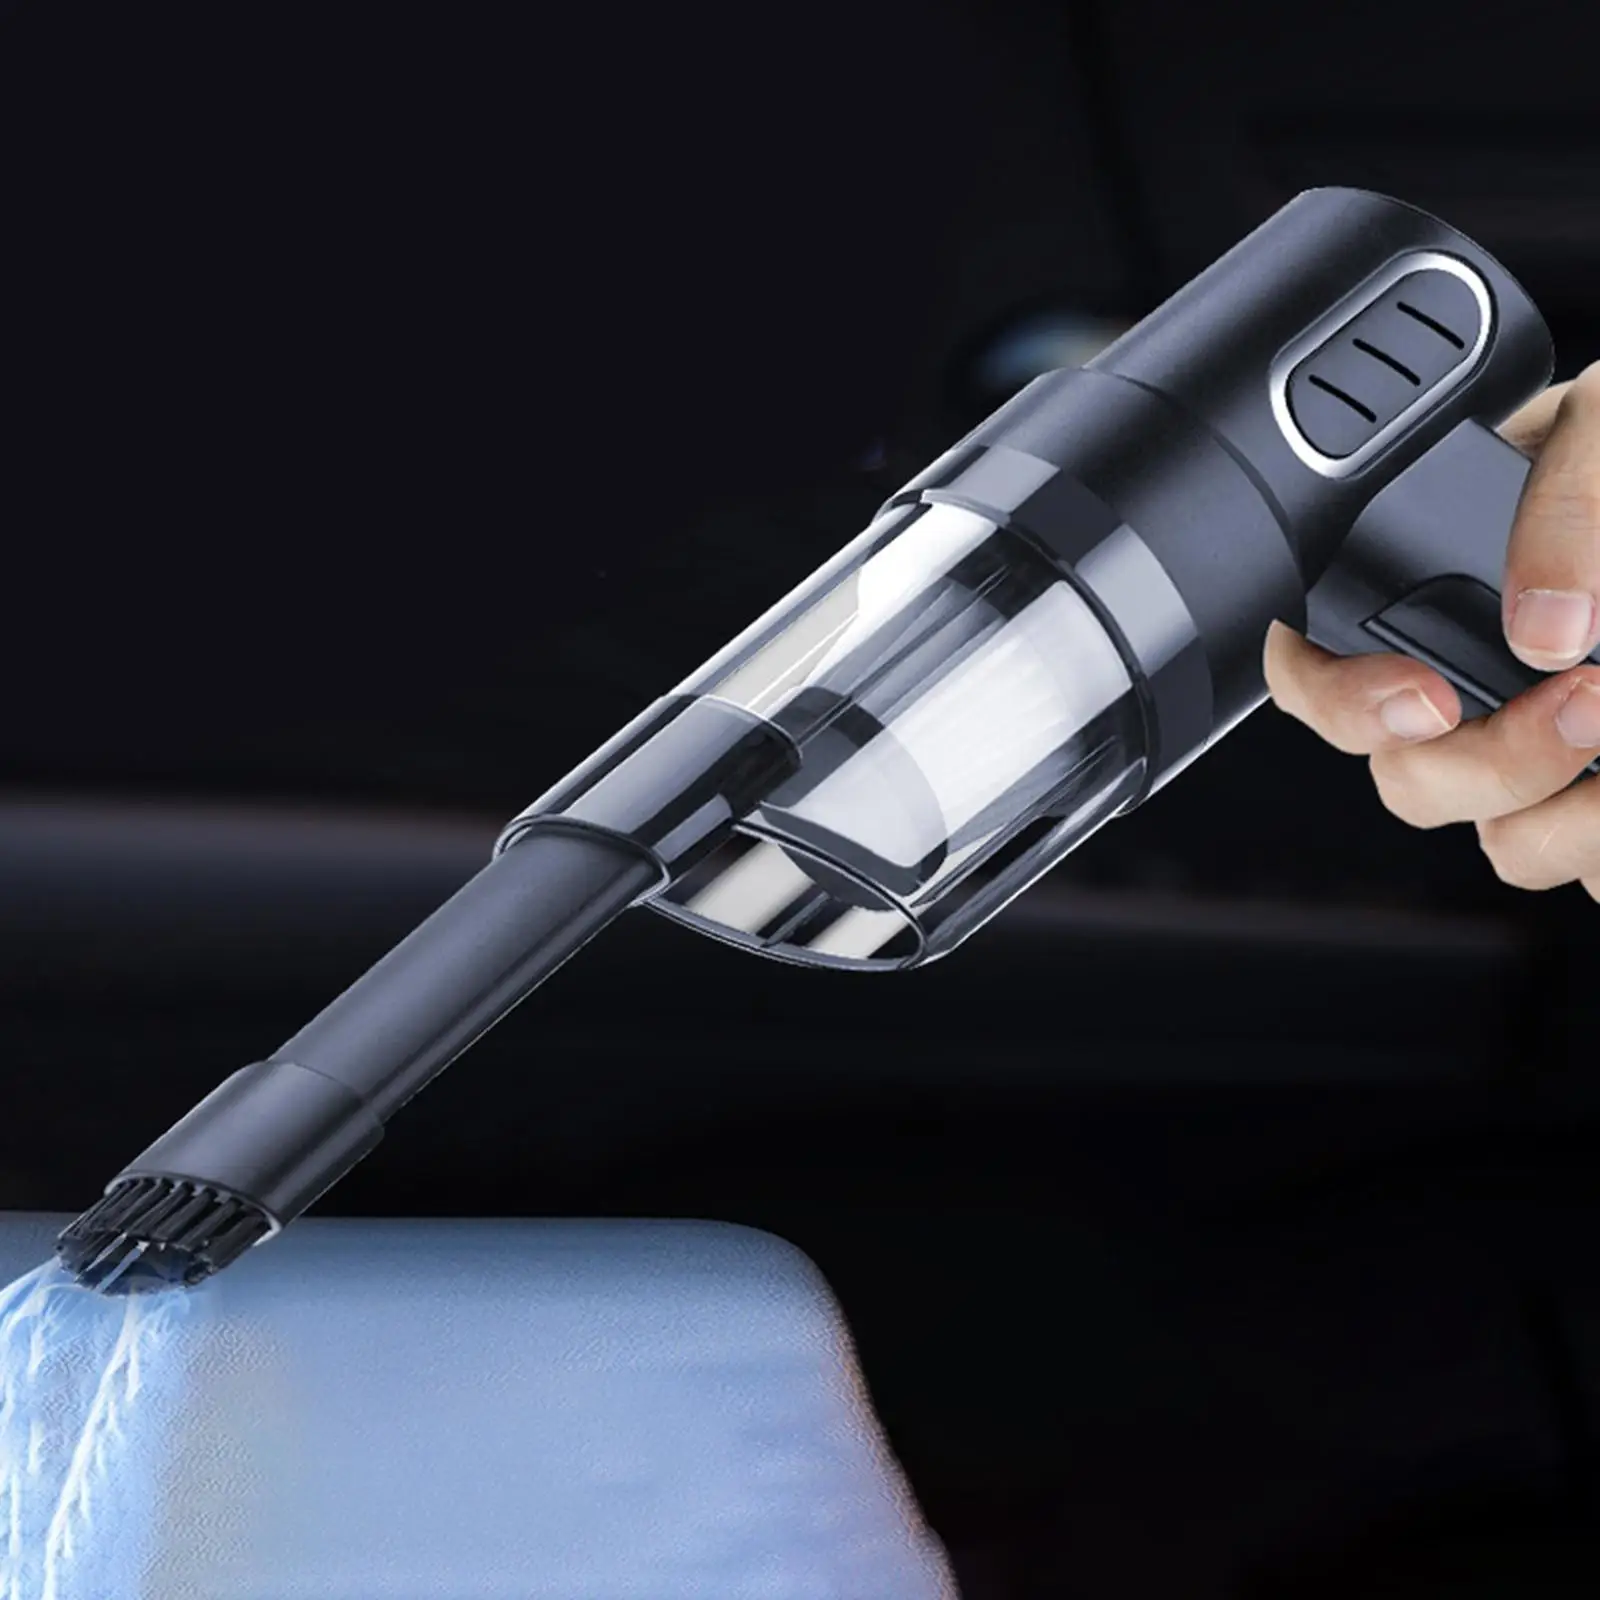 Car Vacuum Cleaner Quick Clean Wet and Dry Cleaning for Vehicle Home